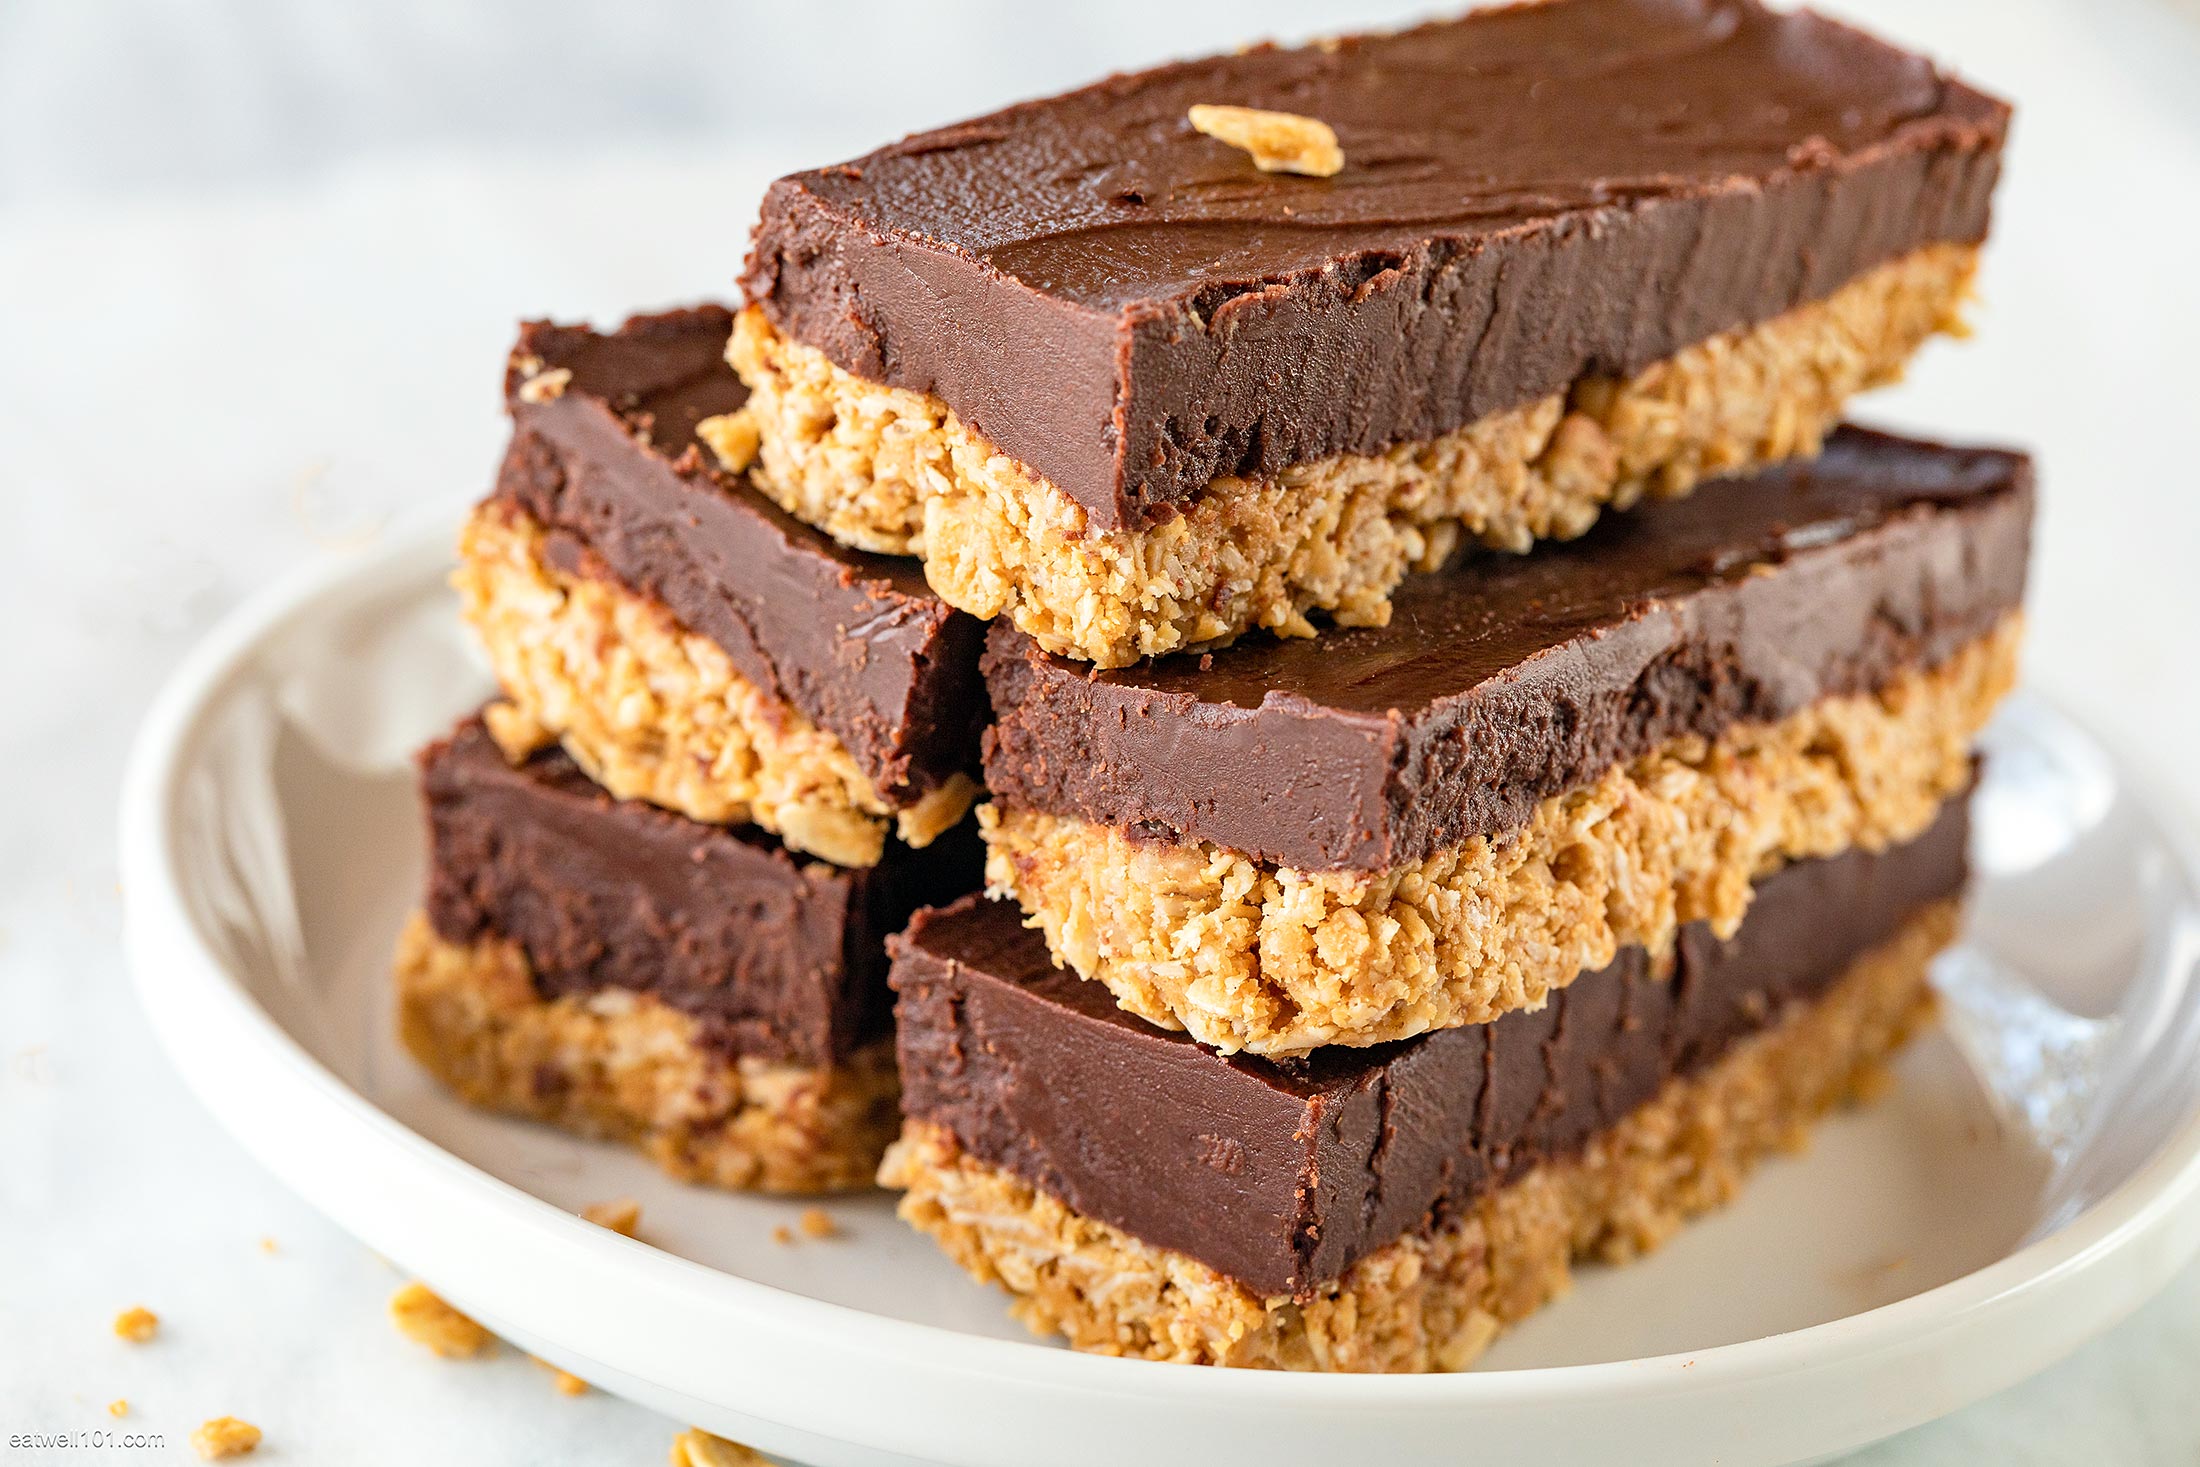 Best Of 74+ Exquisite the kitchen no bake peanut butter bars Not To Be Missed